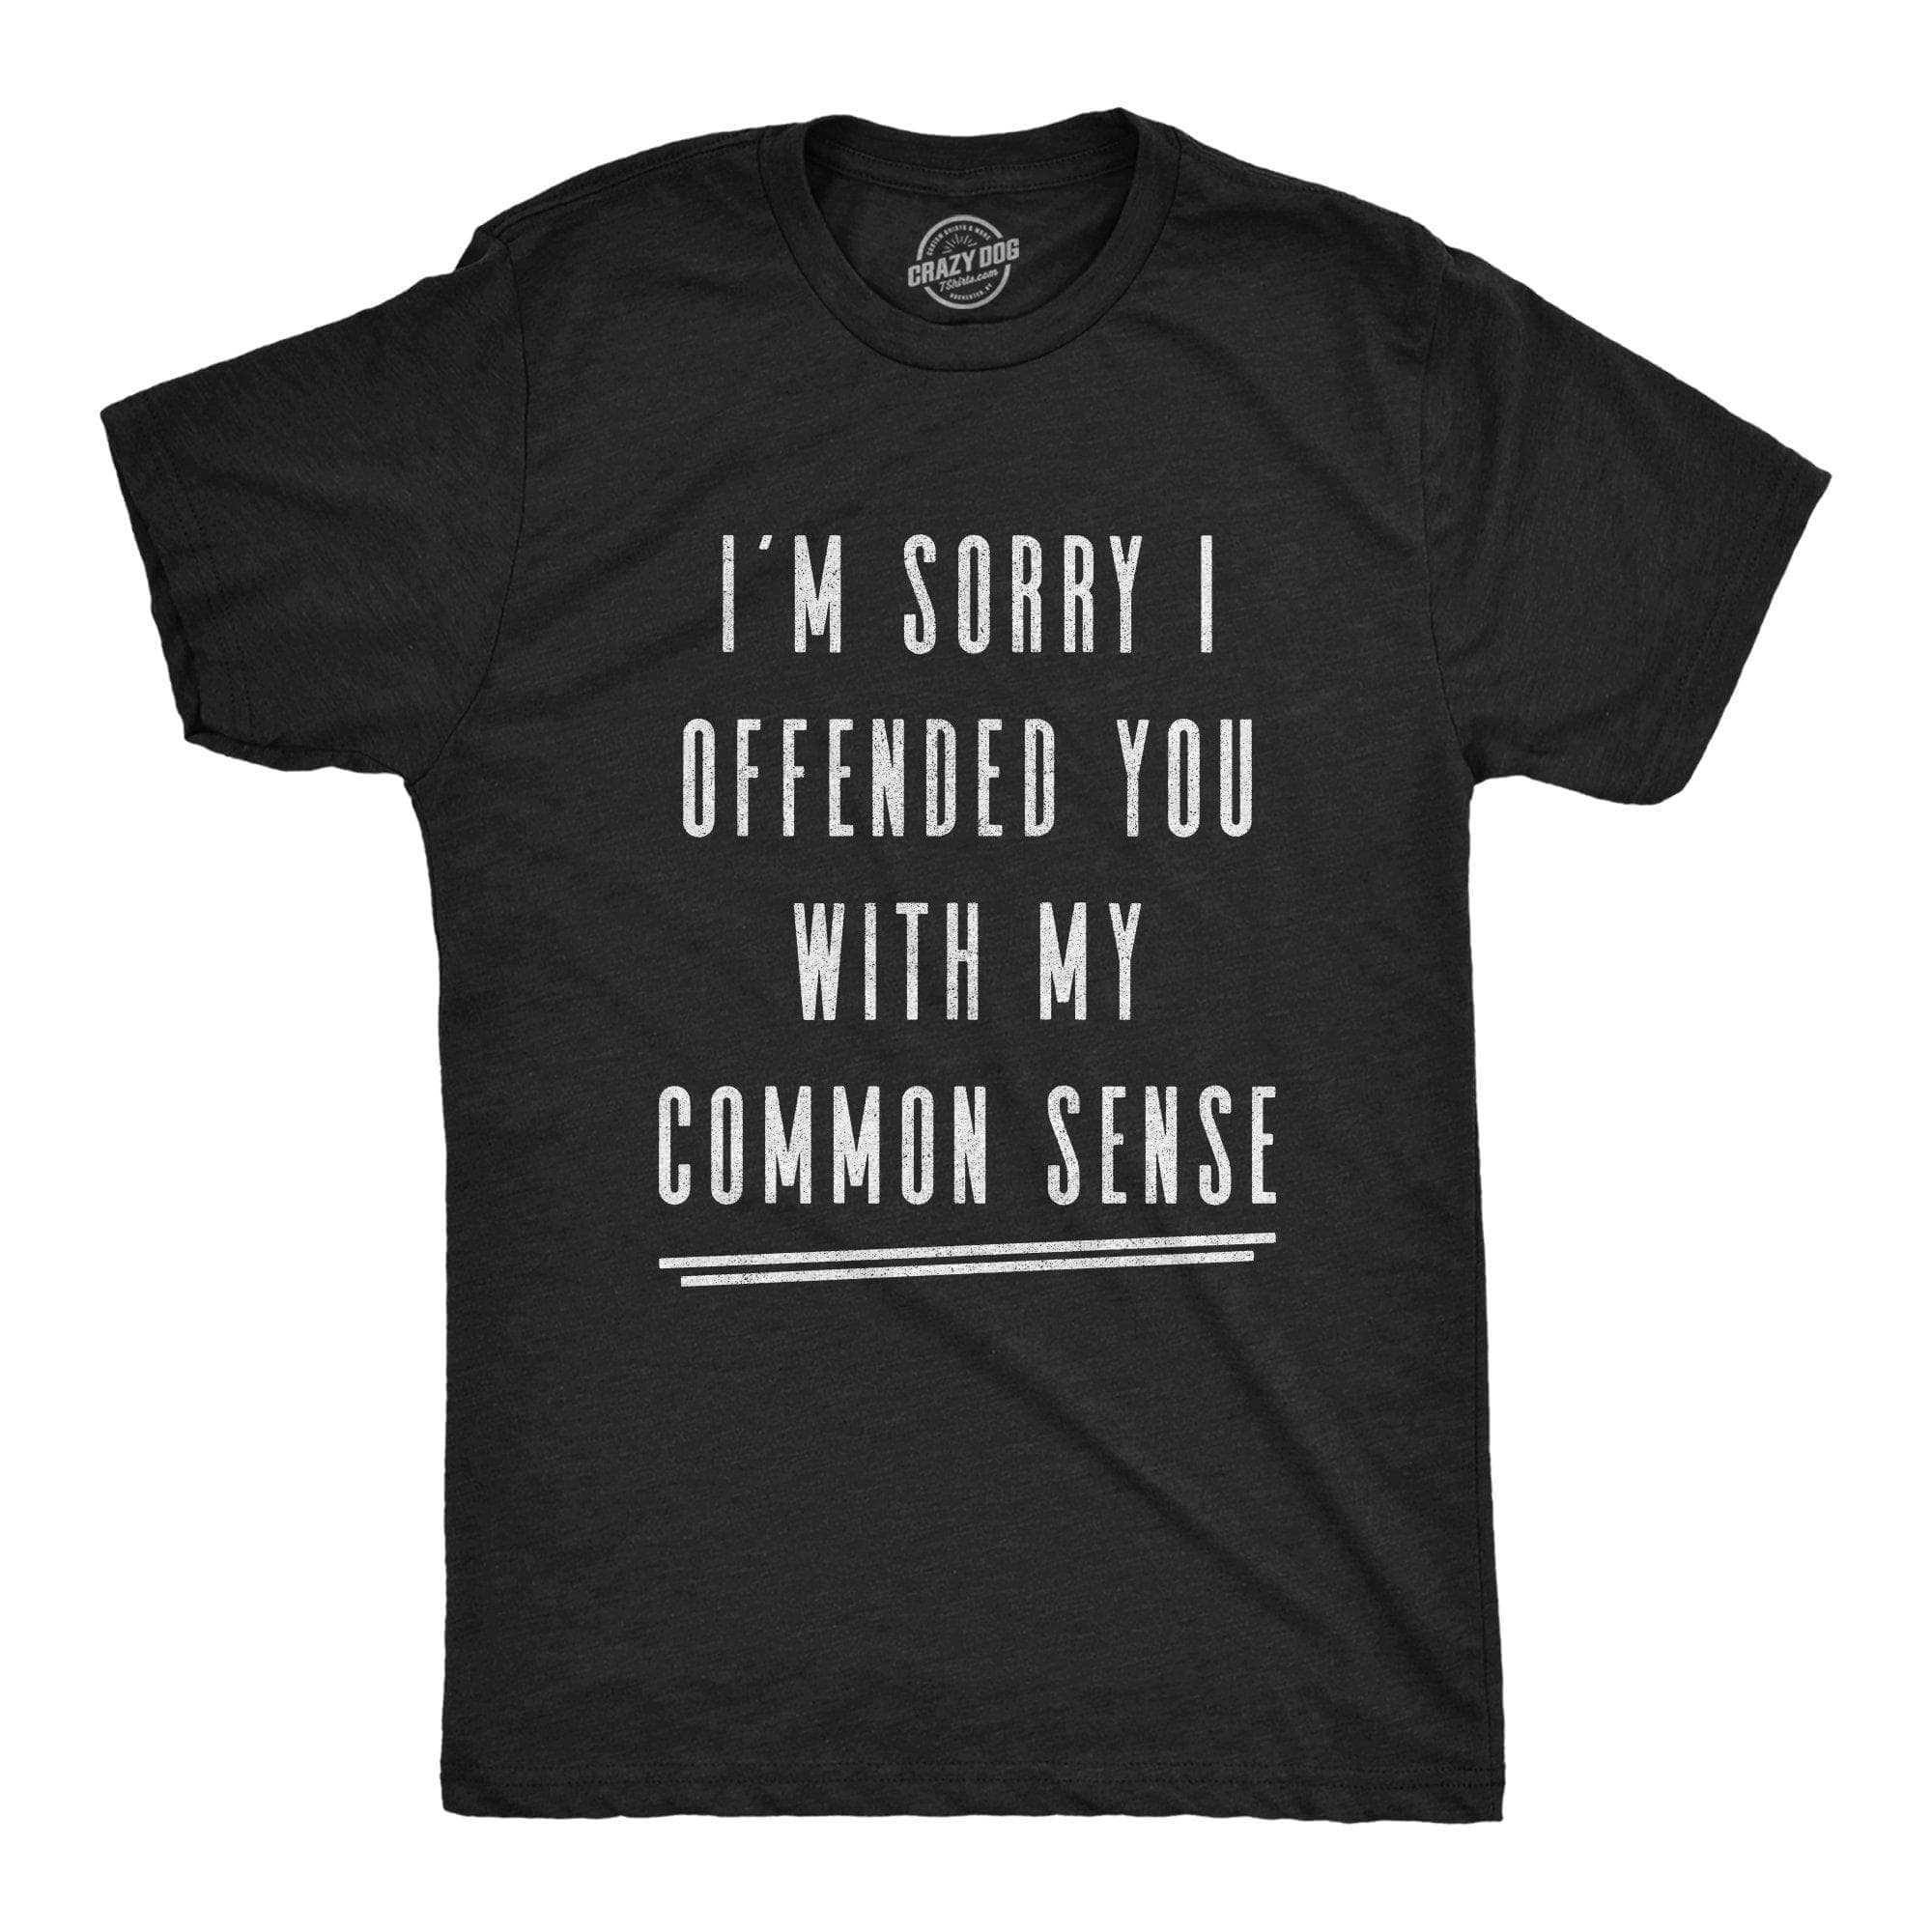 I'm Sorry I Offended You With My Common Sense Men's Tshirt - Crazy Dog T-Shirts